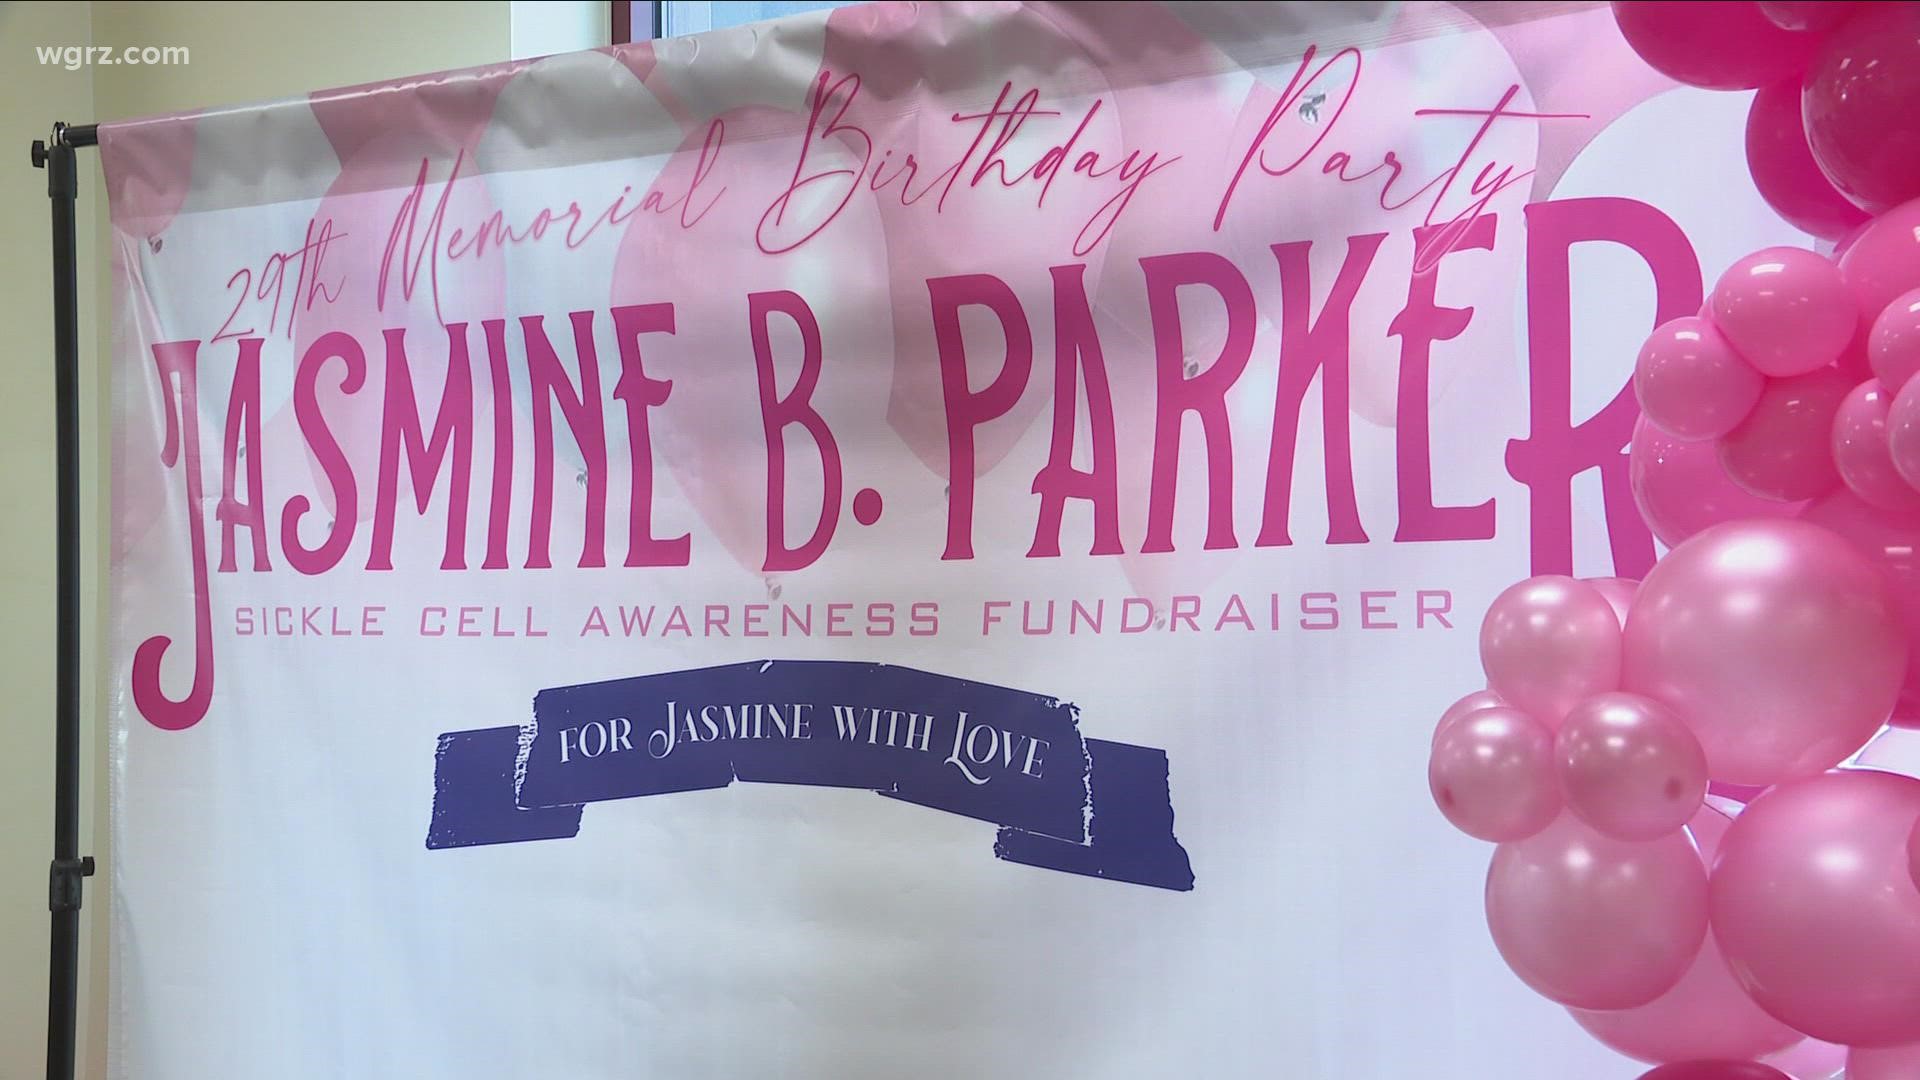 An event at the Johnnie B Wiley Sports Pavilion raised money for sickle cell awareness. It was a memorial birthday party to honor Jasmine Parker.